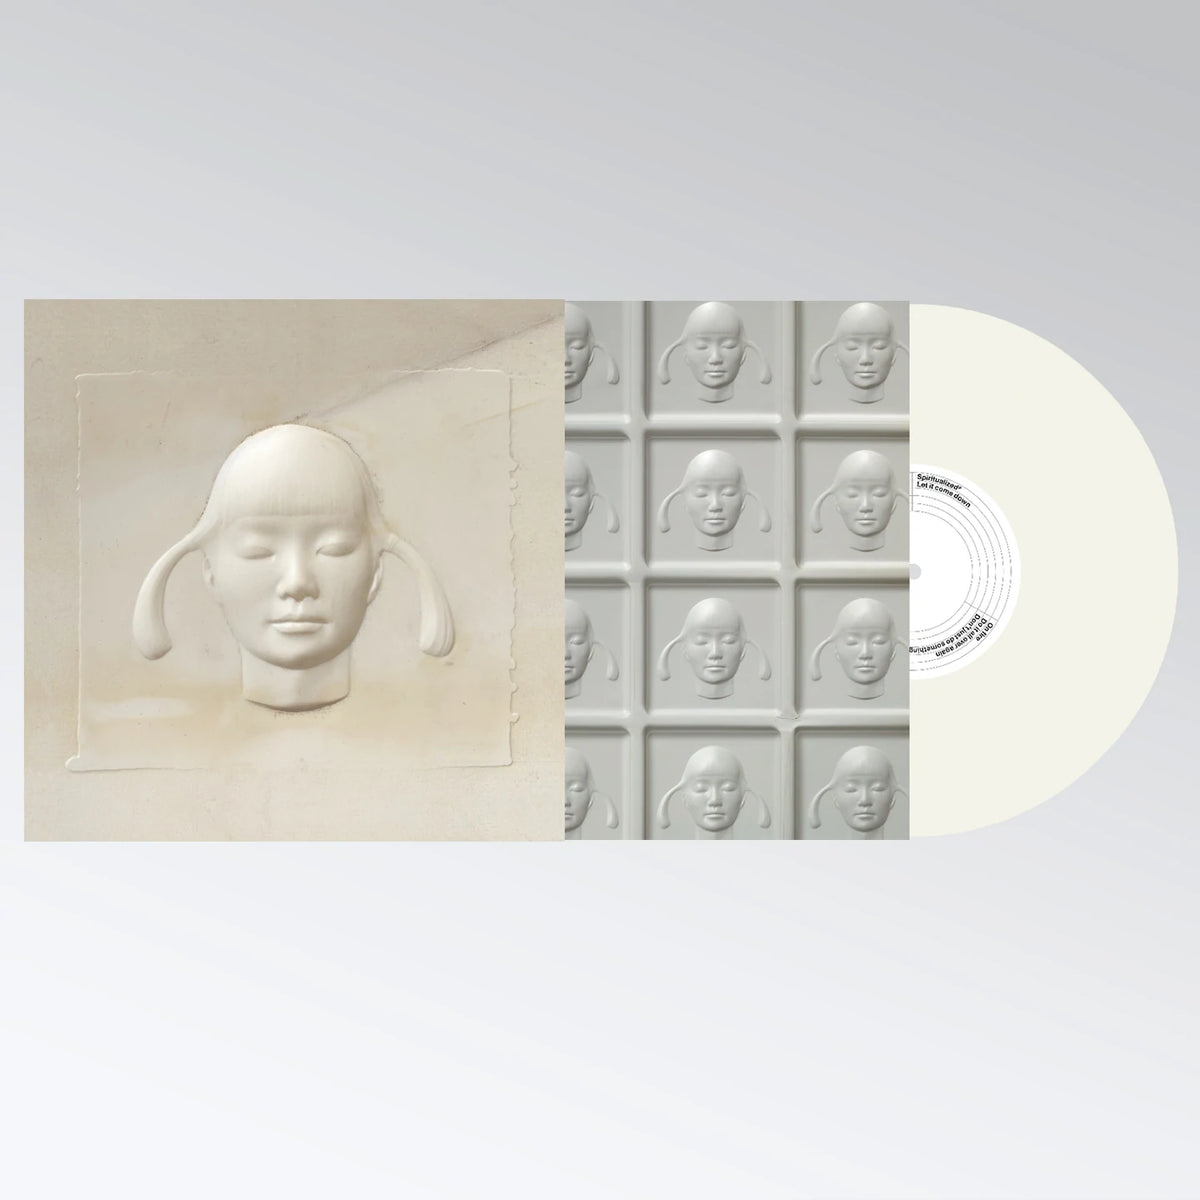 Spiritualized - Let It Come Down 2LP (Indie Exclusive Ivory Vinyl, 180g)